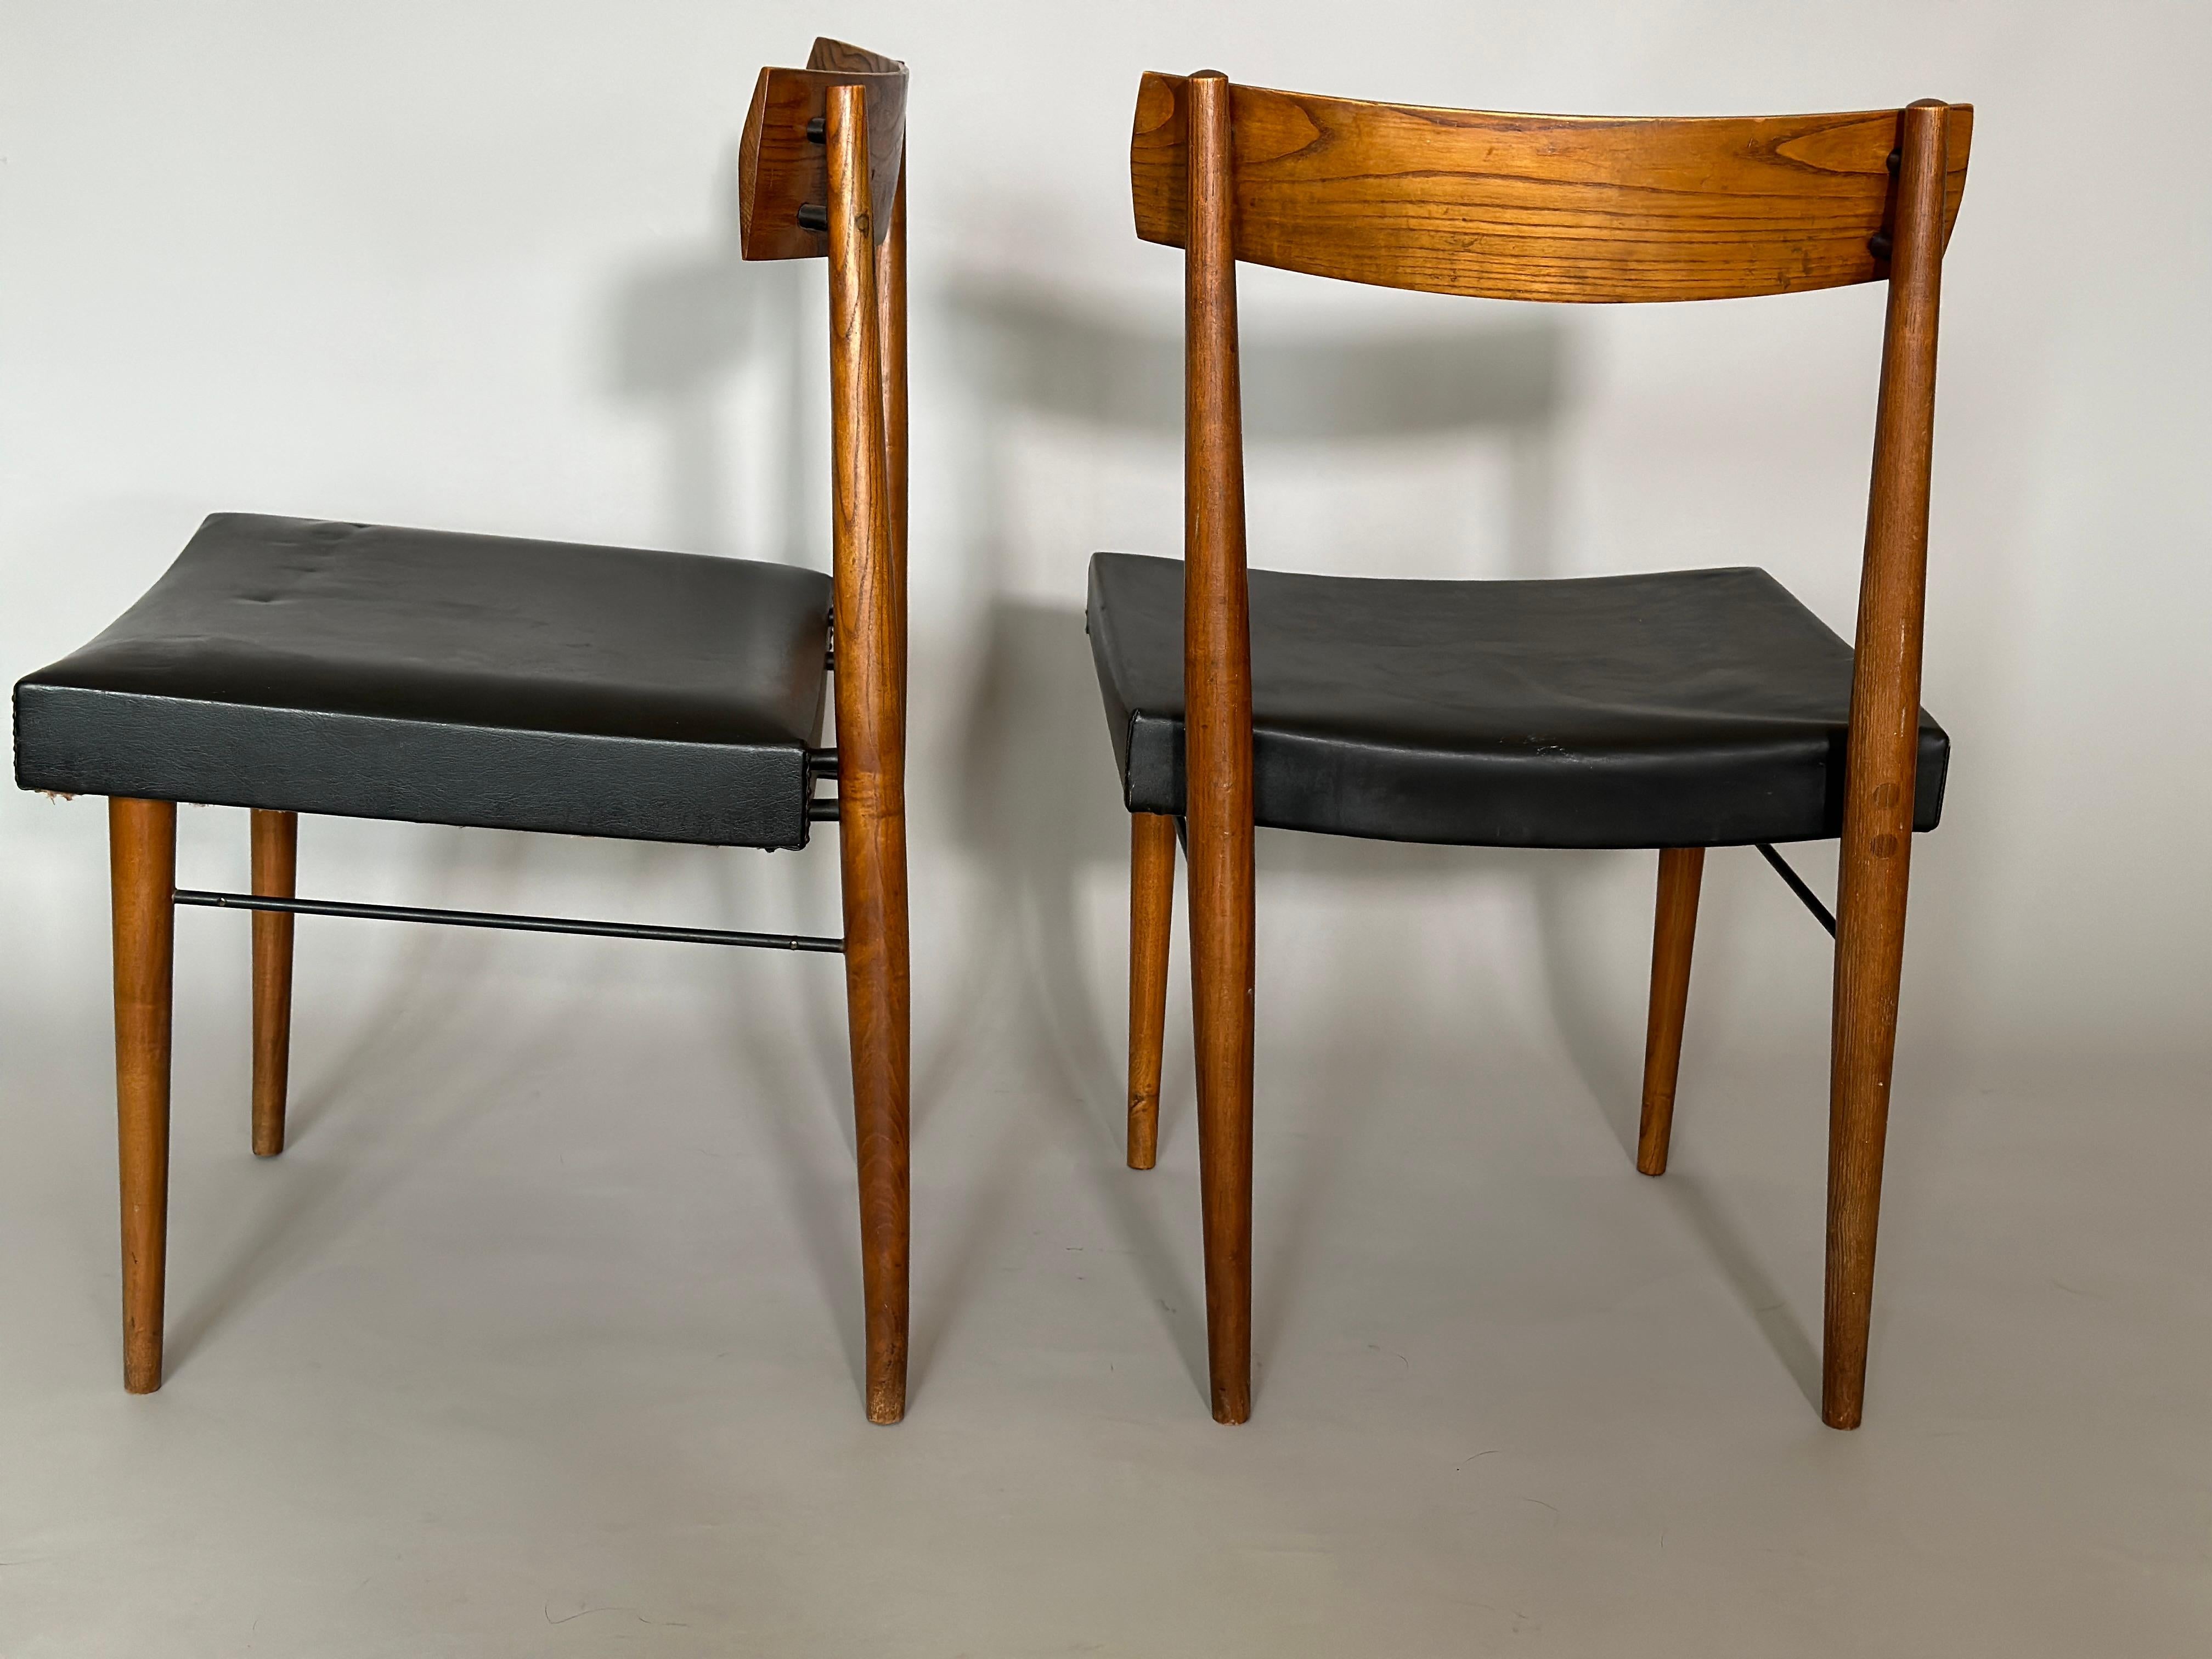 Danish Rosewood dining chairs, 1950s.